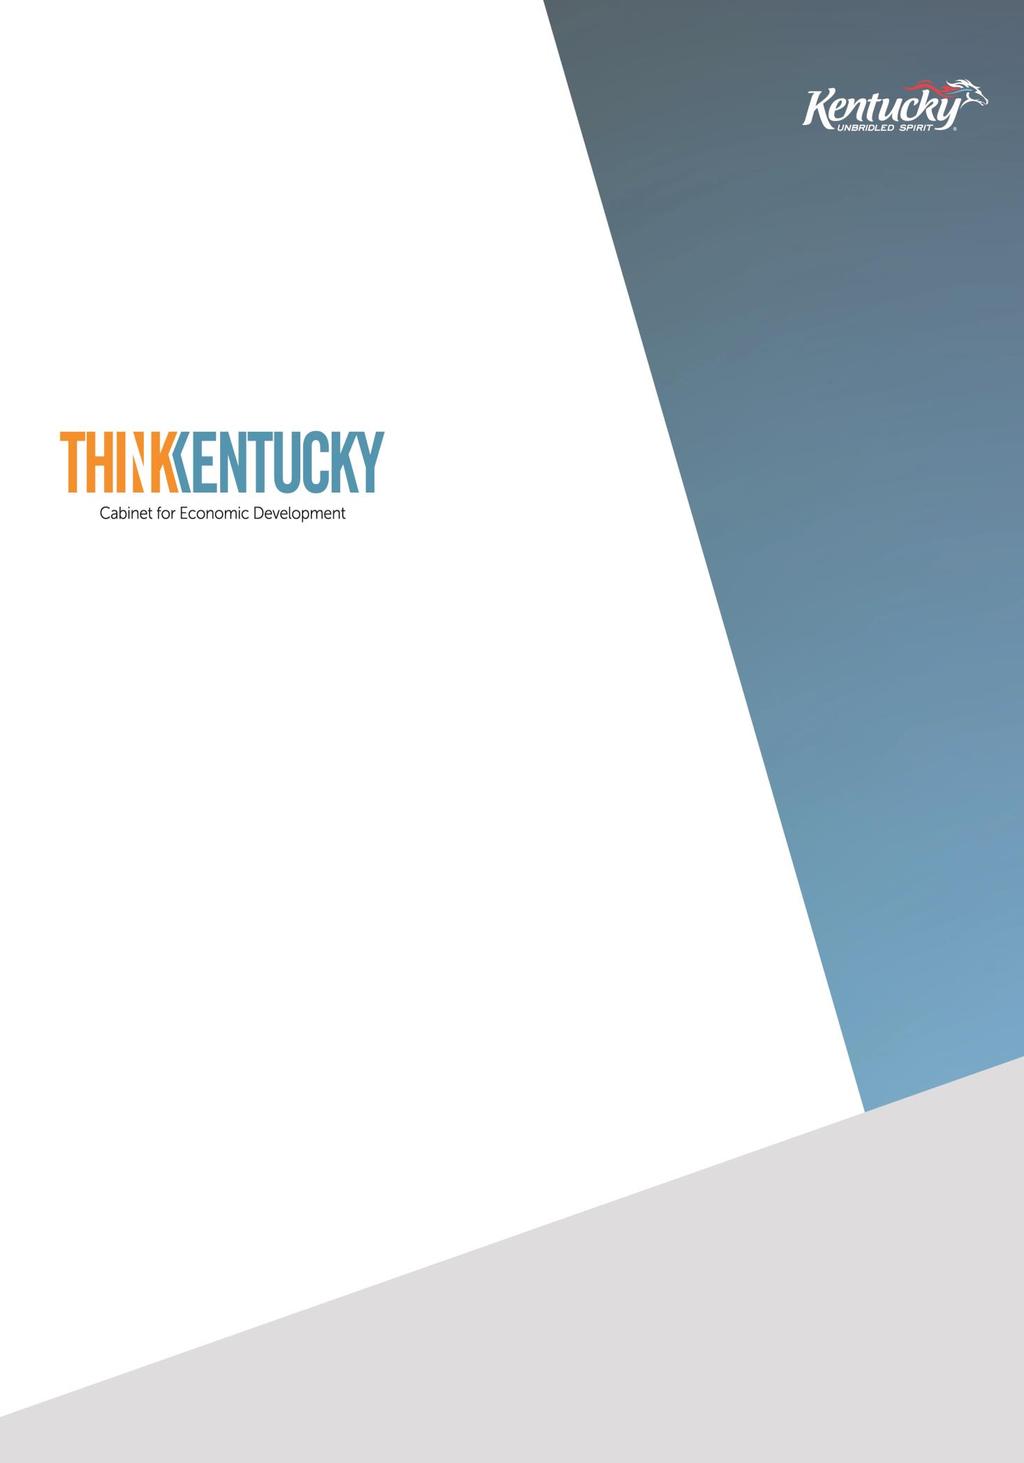 KENTUCKY DIRECTORY OF BUSINESS & INDUSTRY REPORT DATE: March 2, 2018 NUMBER OF FACILITIES: 3,871 TOTAL